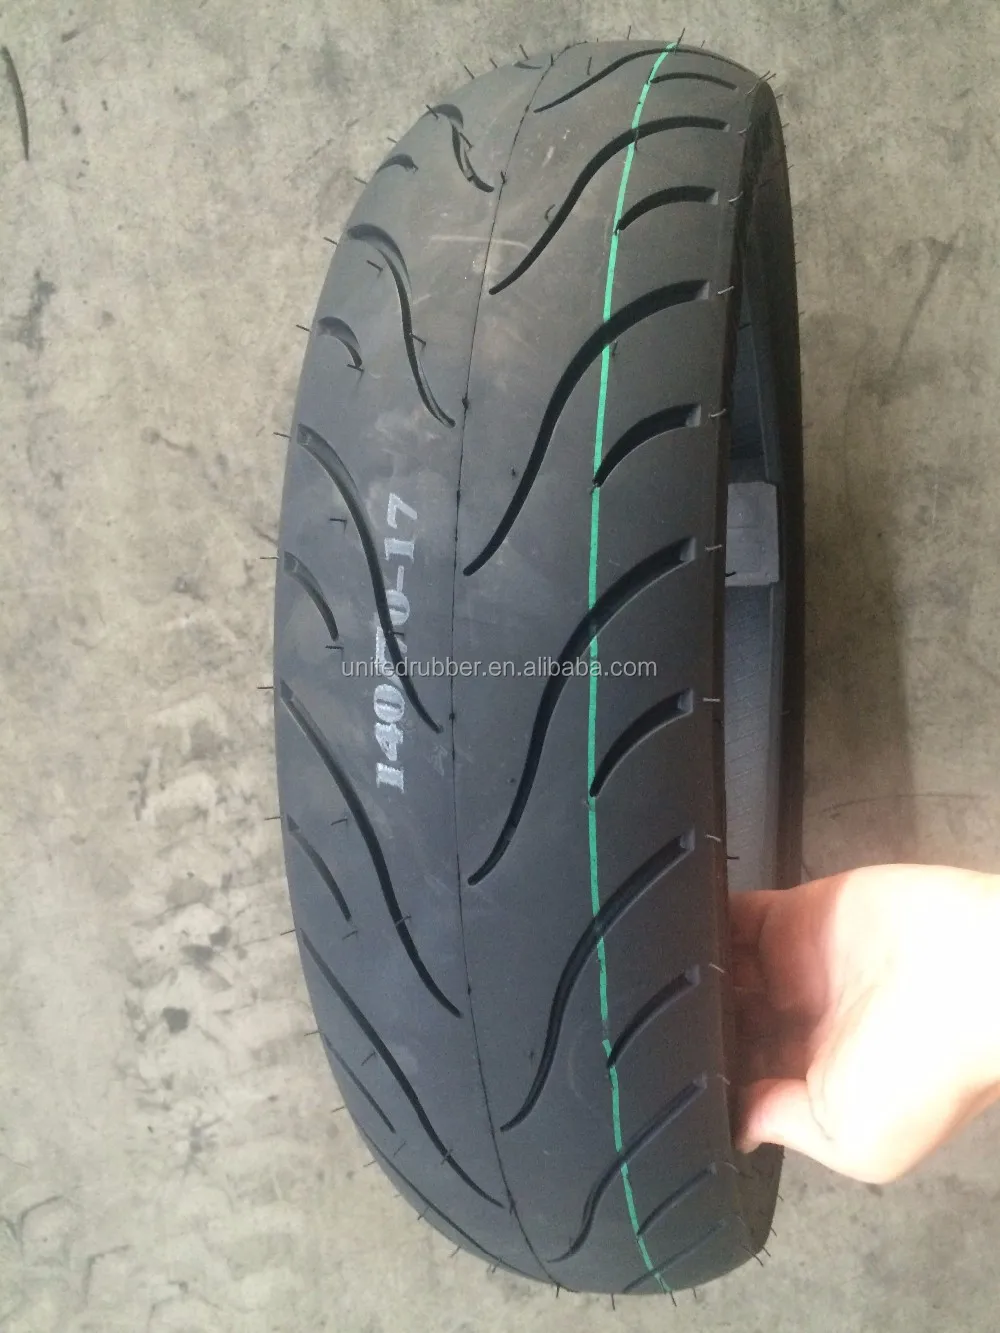 Motorcycle Tire 130 70 17 140 70 17 150 60 17 160 60 17 170 60 17 View 160 60 17 Motorcycle Tire Ridestone Or Oem Product Details From Shandong United Rubber Co Ltd On Alibaba Com